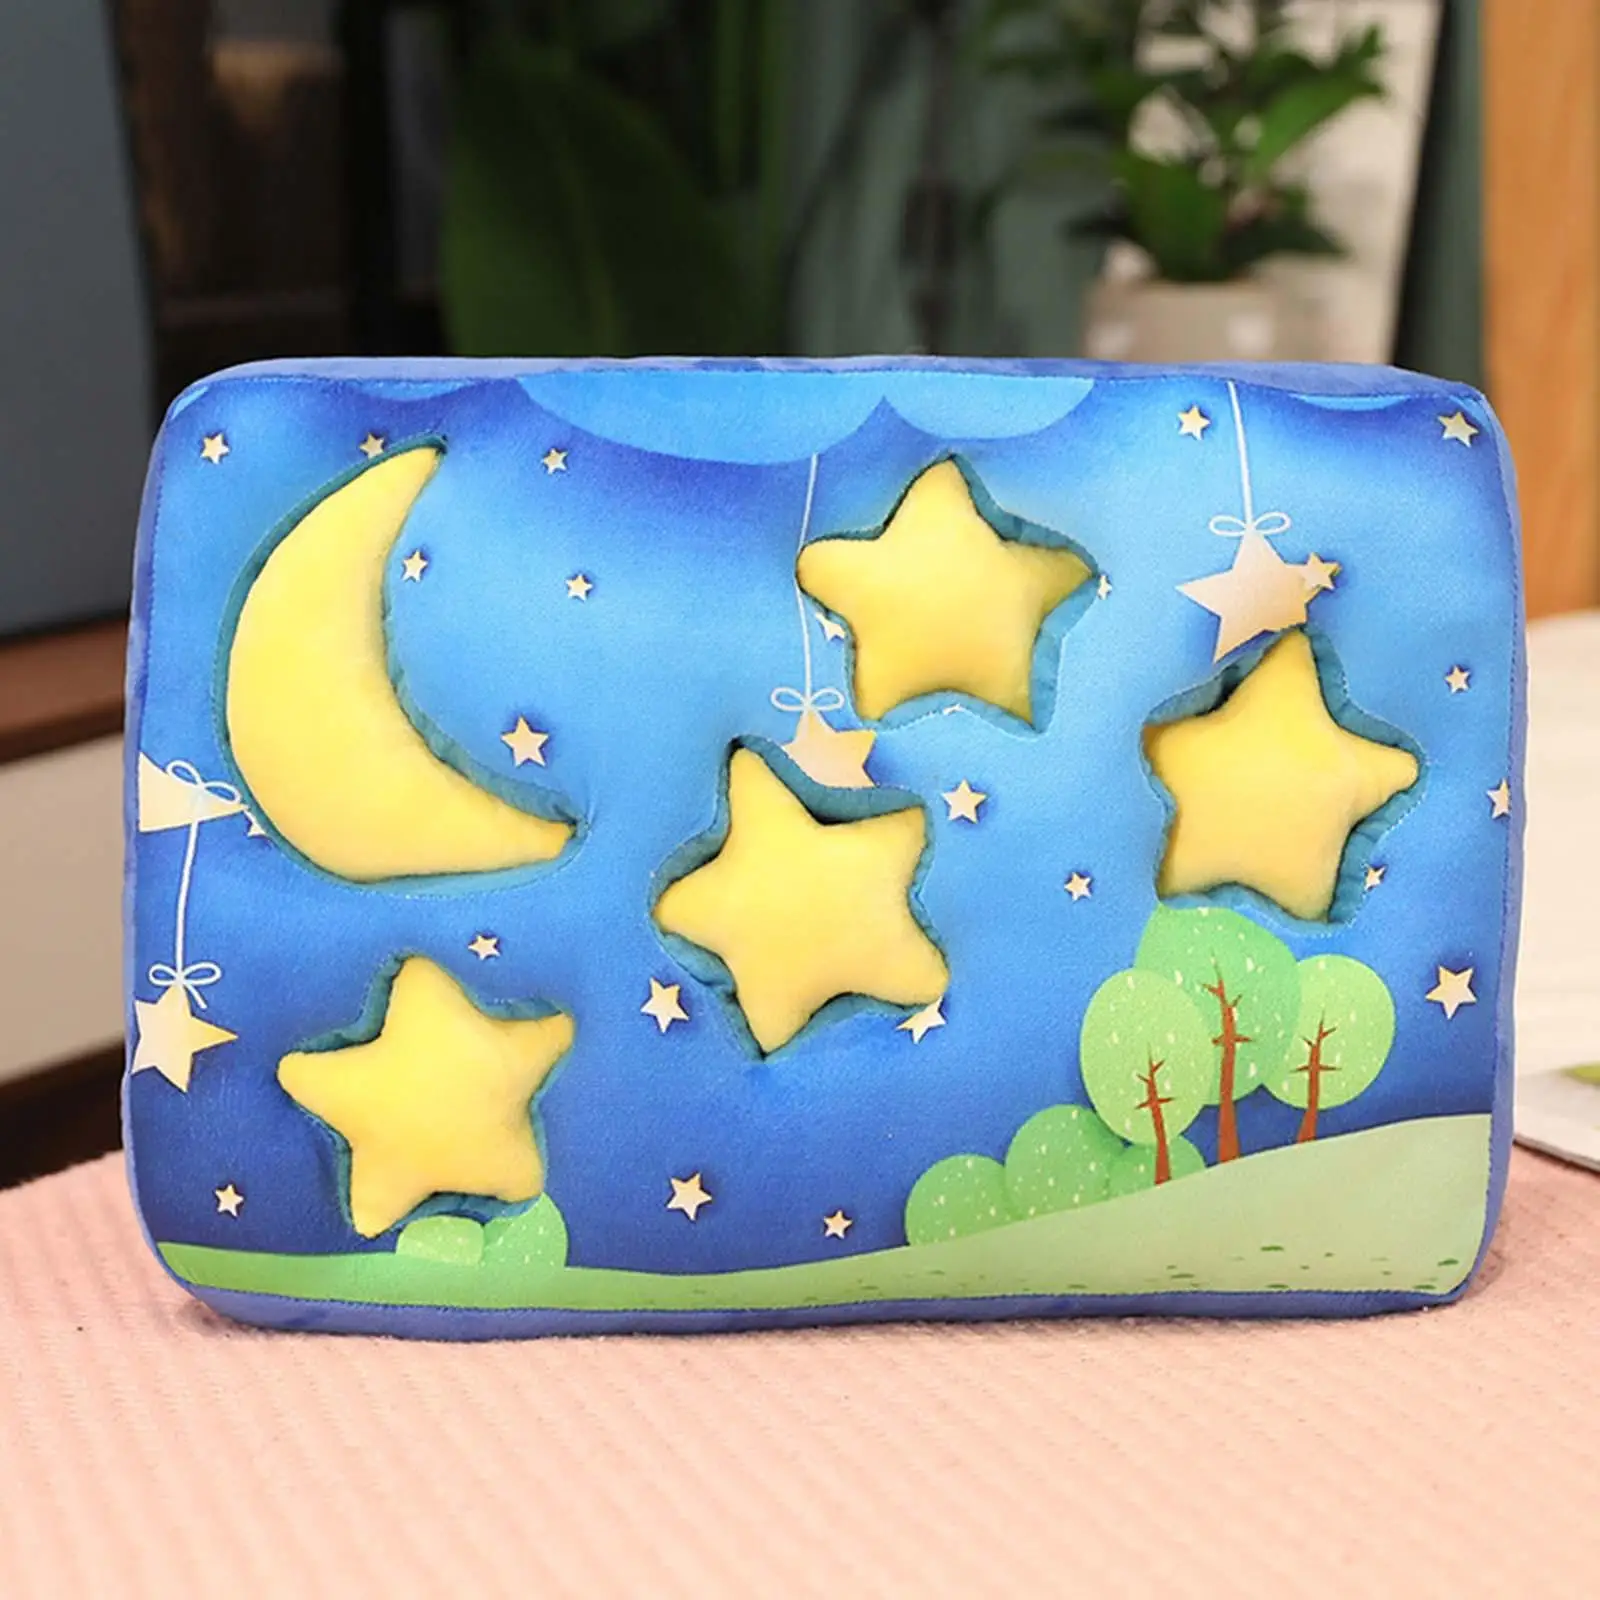 Cartoon Star Moon Outer Space Sky Decor Child Safety  Super Soft Throw    for Bedroom Toddlers Cats Dog